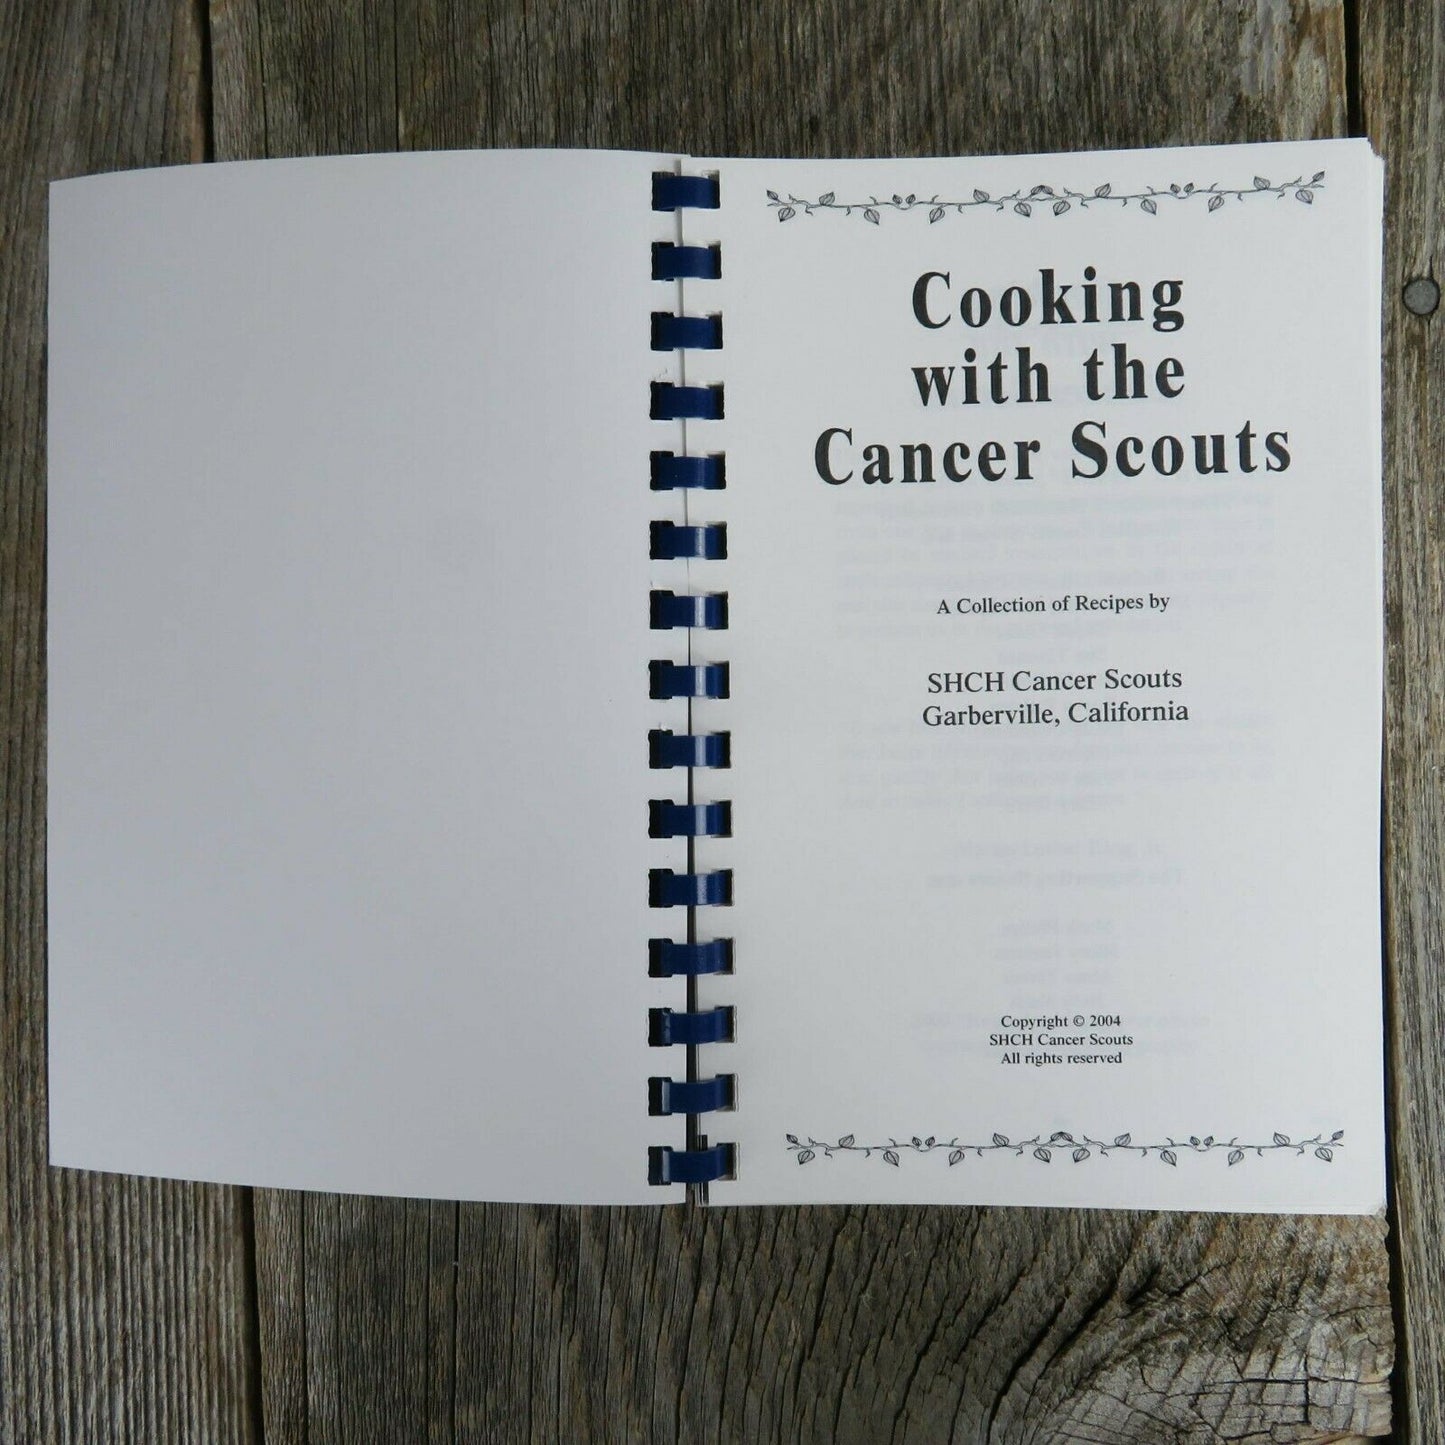 Garberville California Cookbook Cooking with Cancer Scouts 2004 Humboldt County - At Grandma's Table